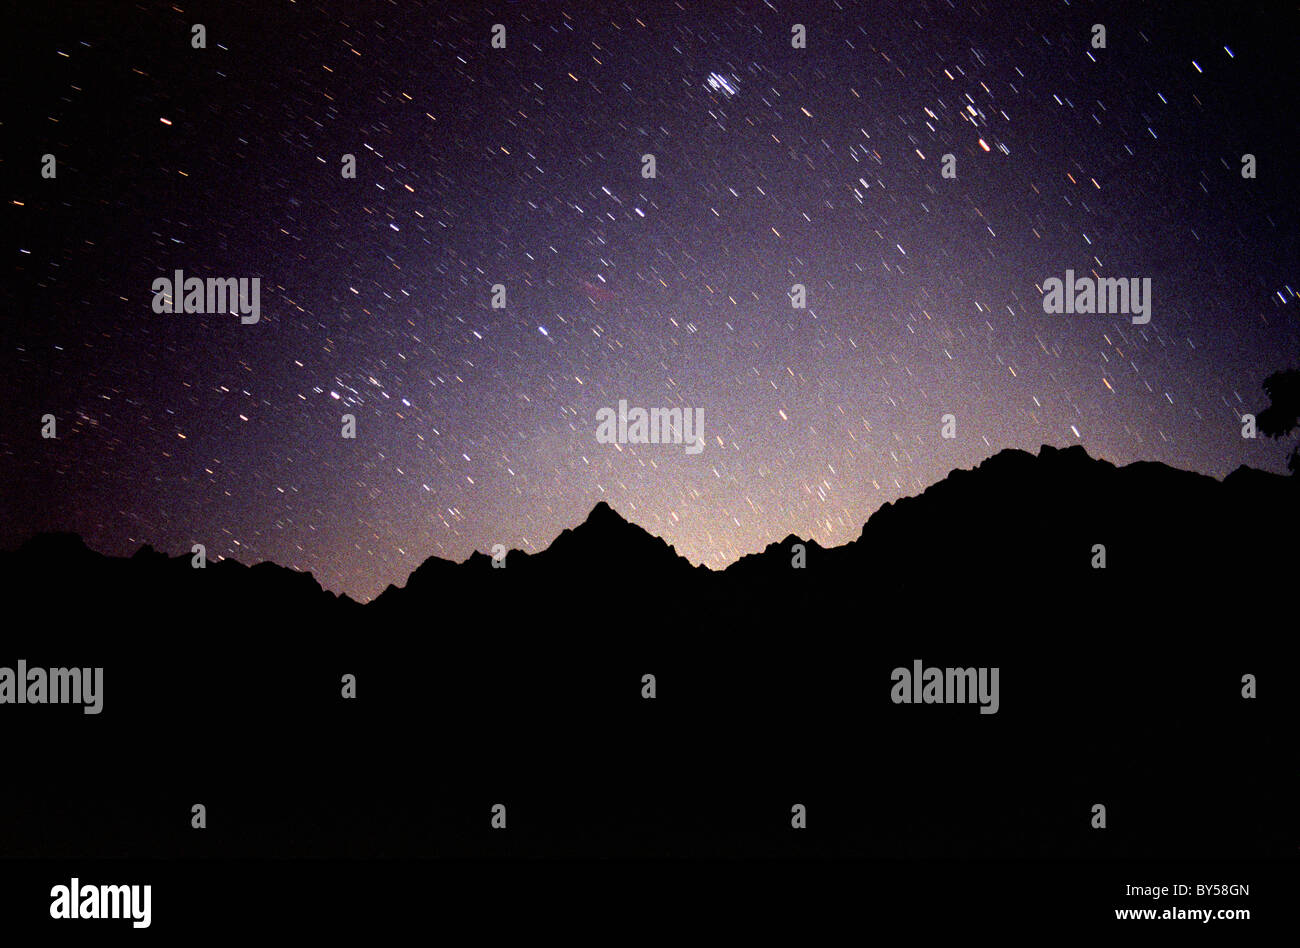 A mountain silhouetted against a night sky filled with stars Stock Photo